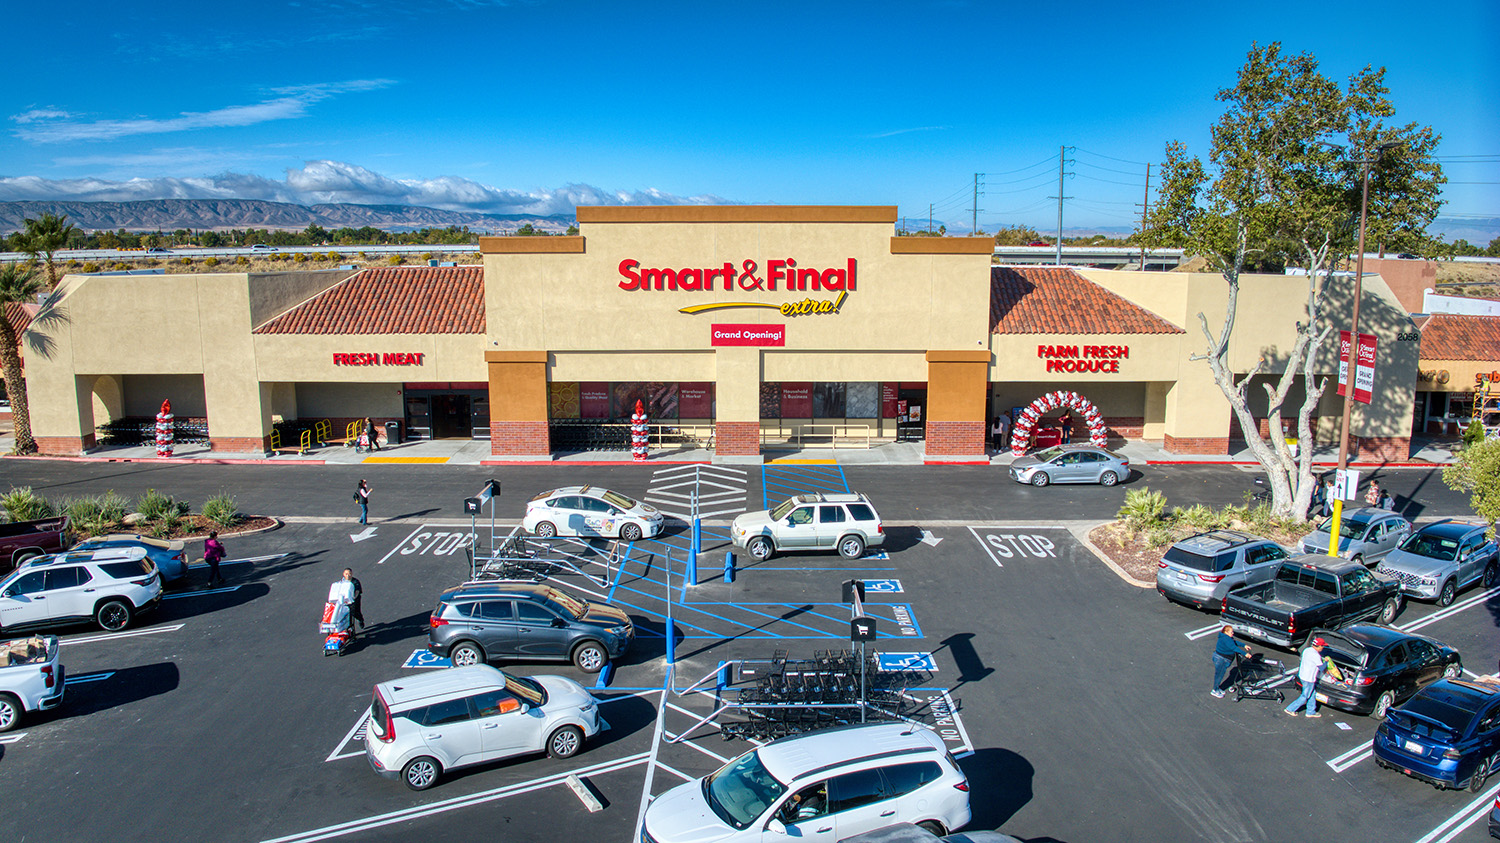 Hanley Investment Group Arranges Sales of New Single-Tenant Smart & Final Extra! and dd’s Discounts at Antelope Valley Plaza for $11.38 Million